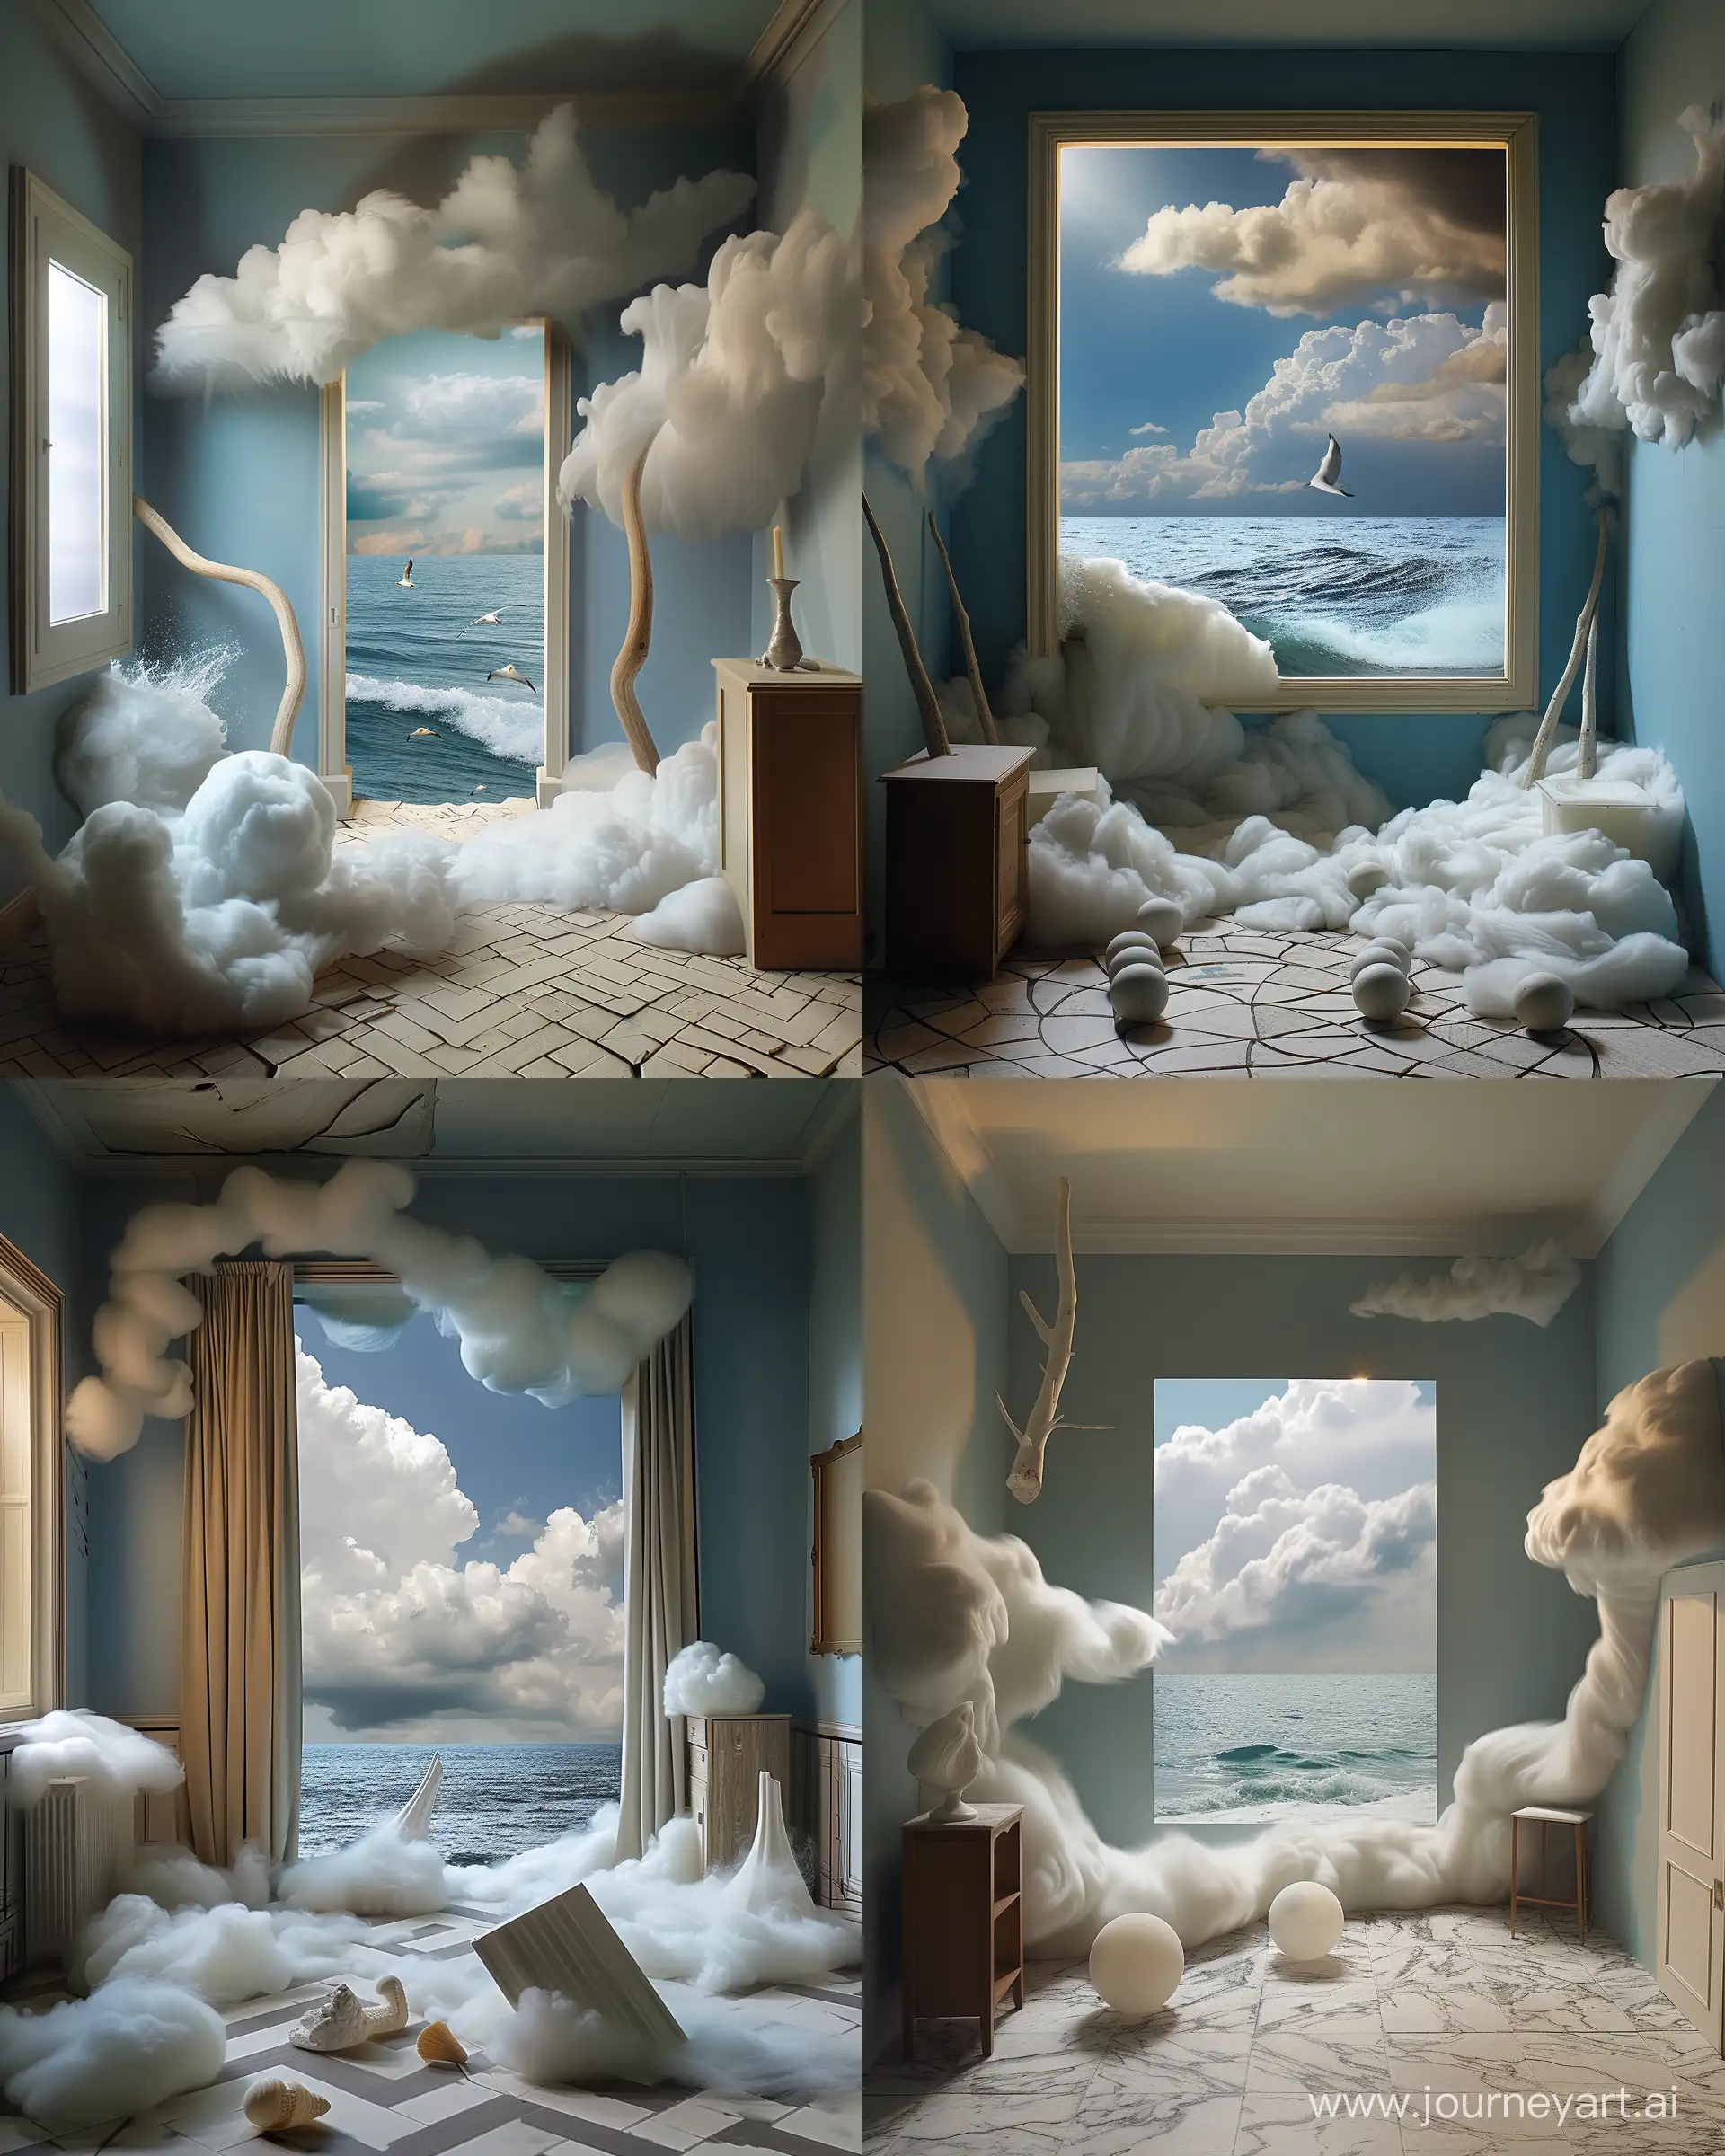 https://i.postimg.cc/gcvf0FRN/sdgery346-Abstract-and-poetic-sculpture-environment-art-in-a-r-bd24dc6f-0a30-425b-90d7-eee50aec7884.png,Surrealistic collision of sea and clouds in the room --ar 4:5